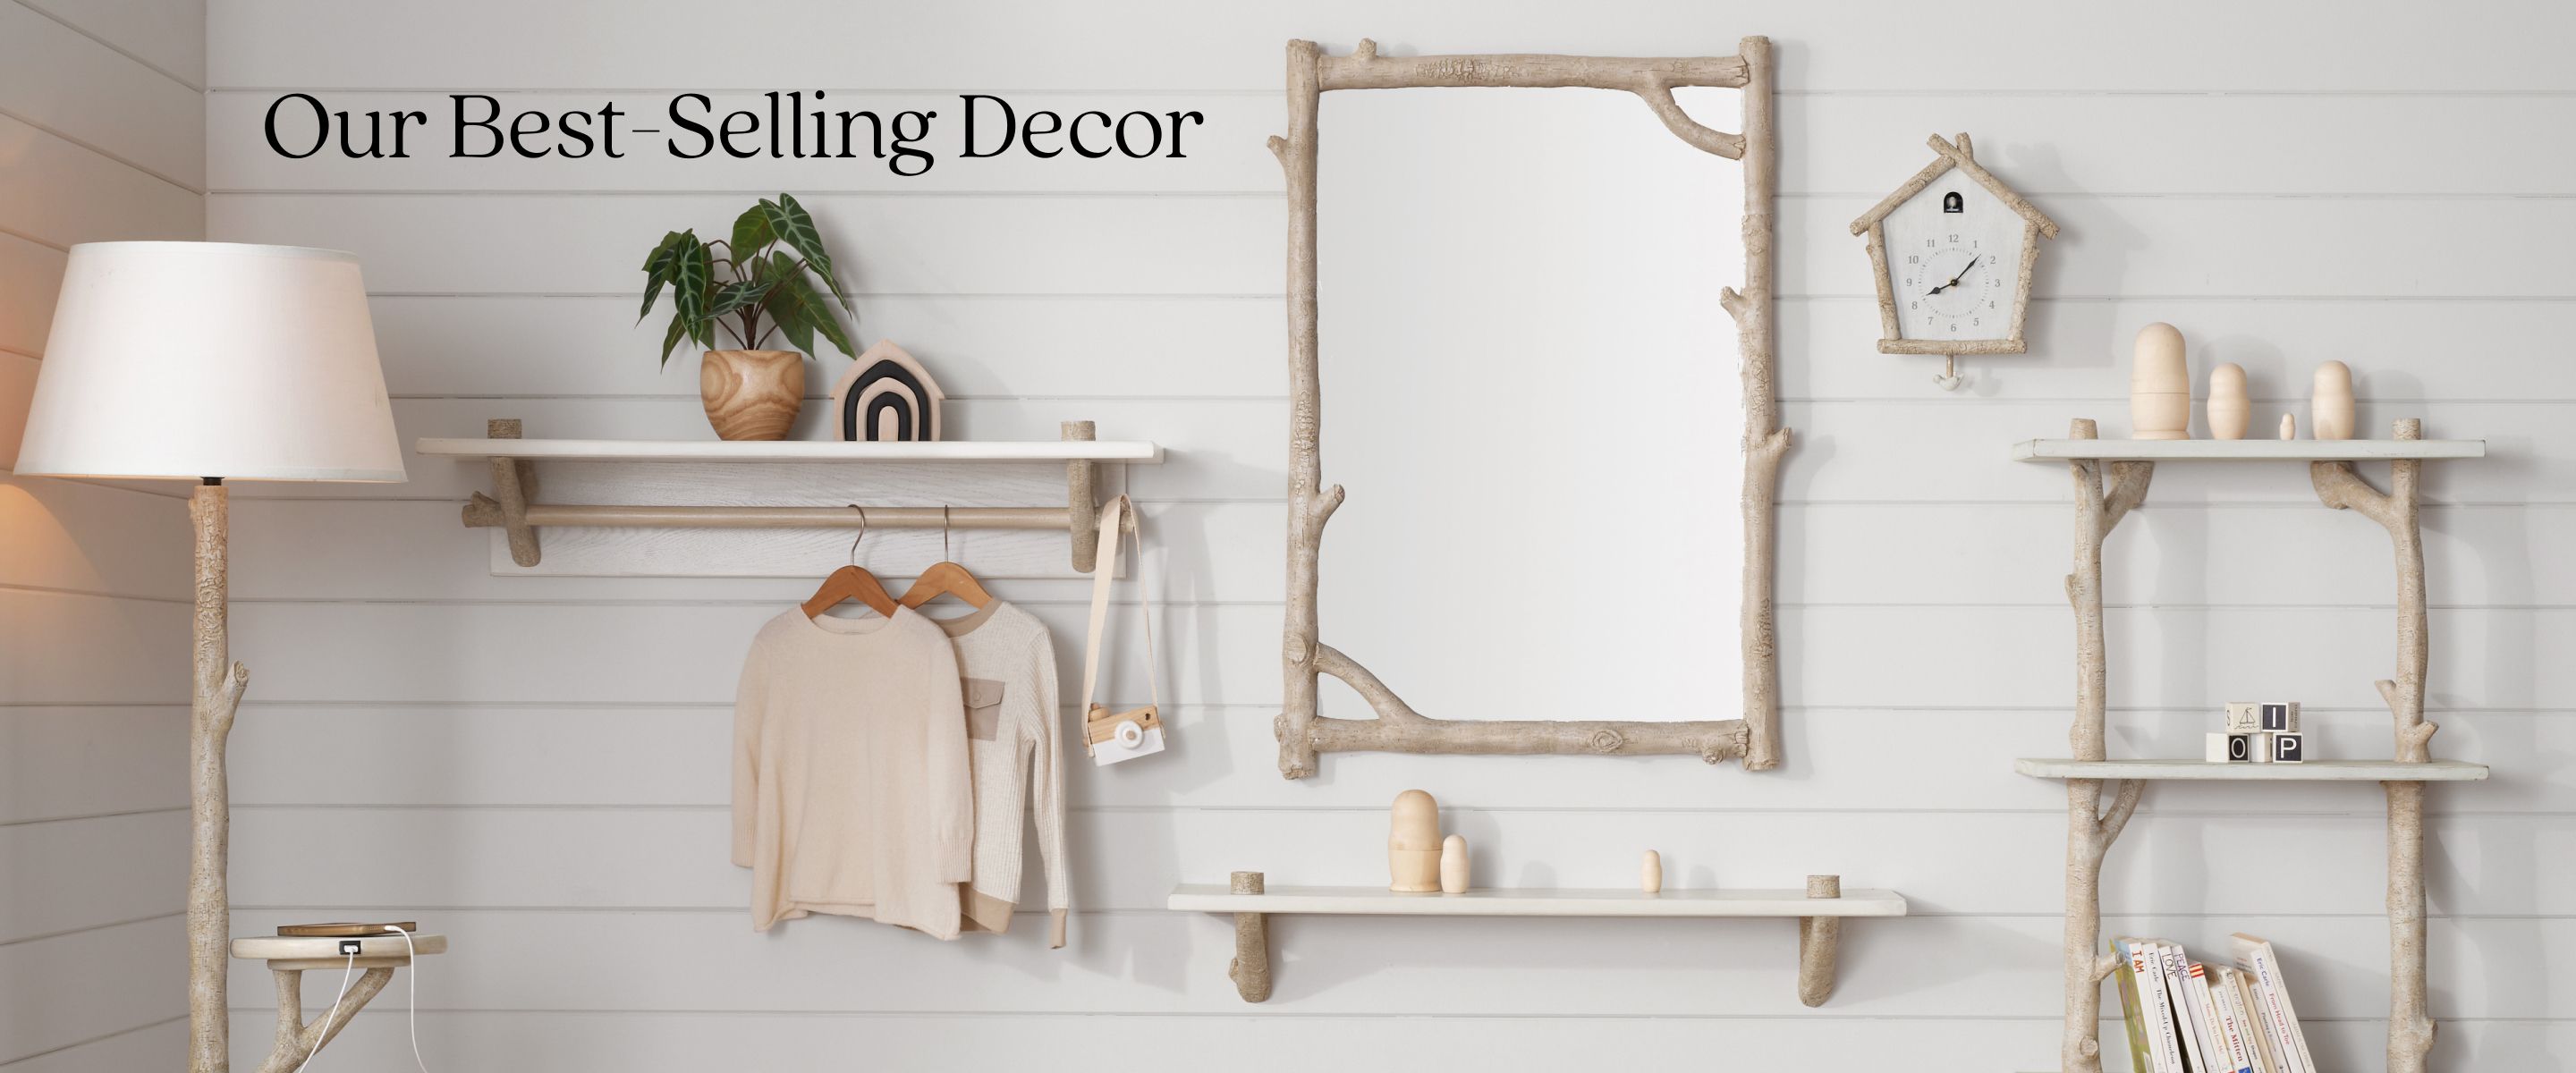 Our Best-Selling Decor